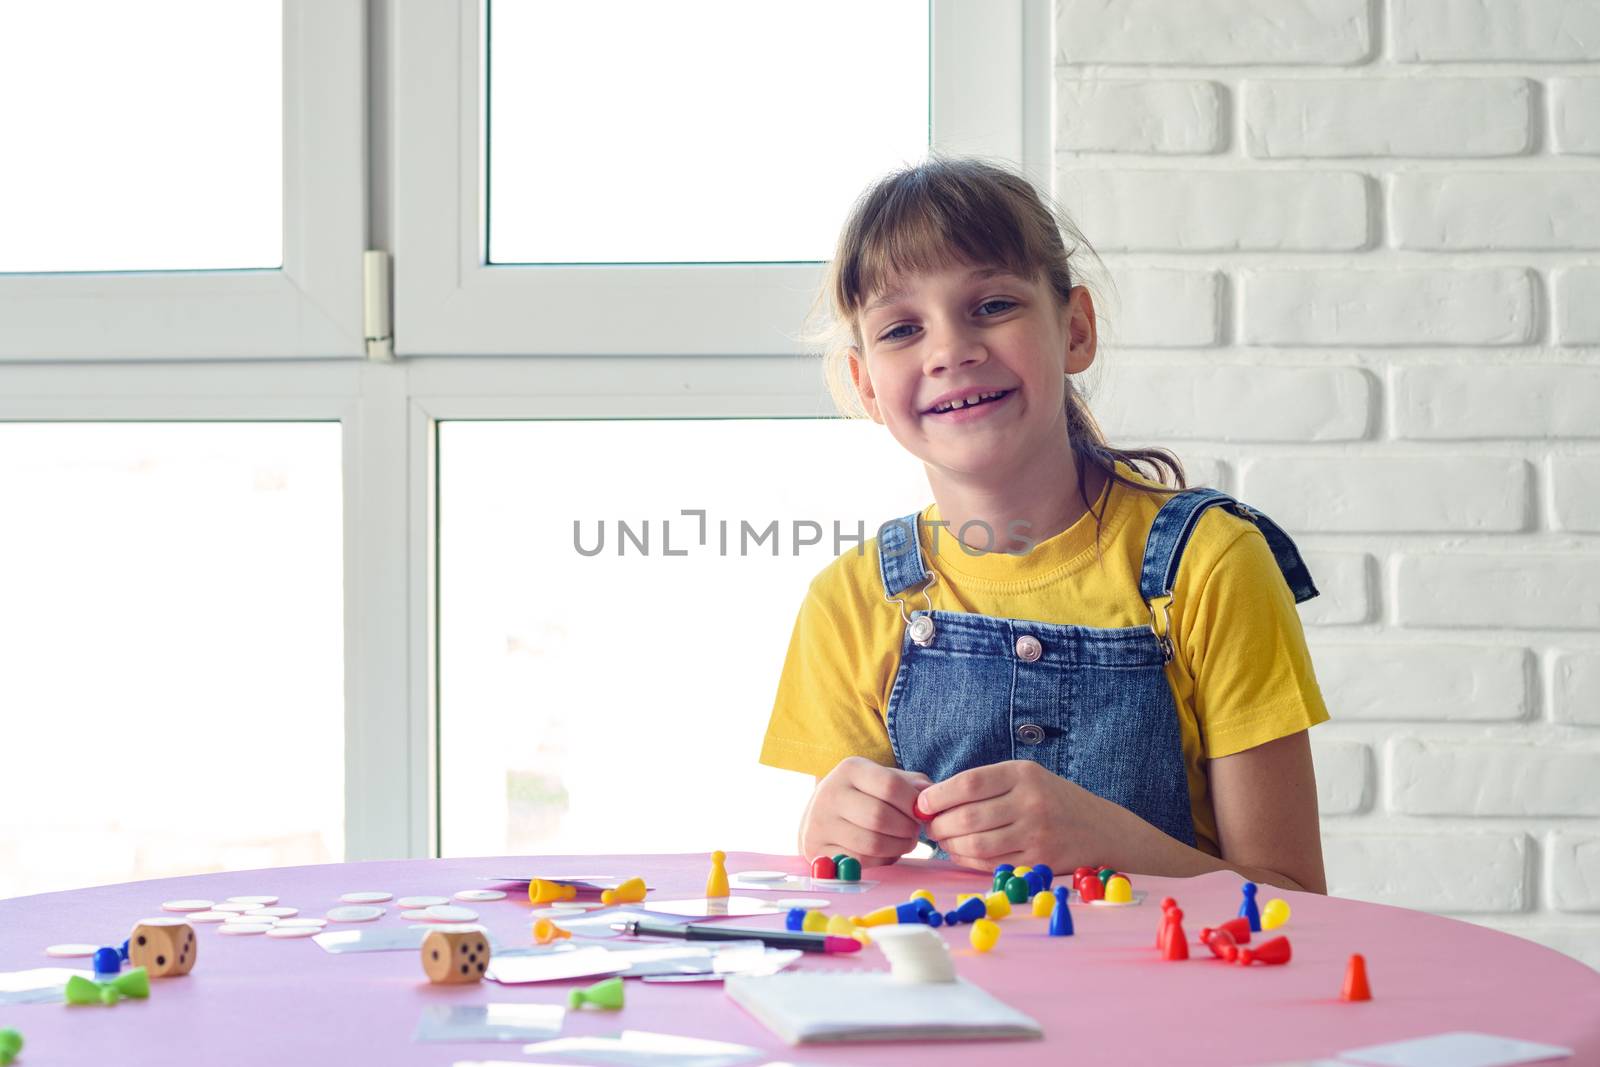 Cheerful girl plays board games at the table and looked into the frame